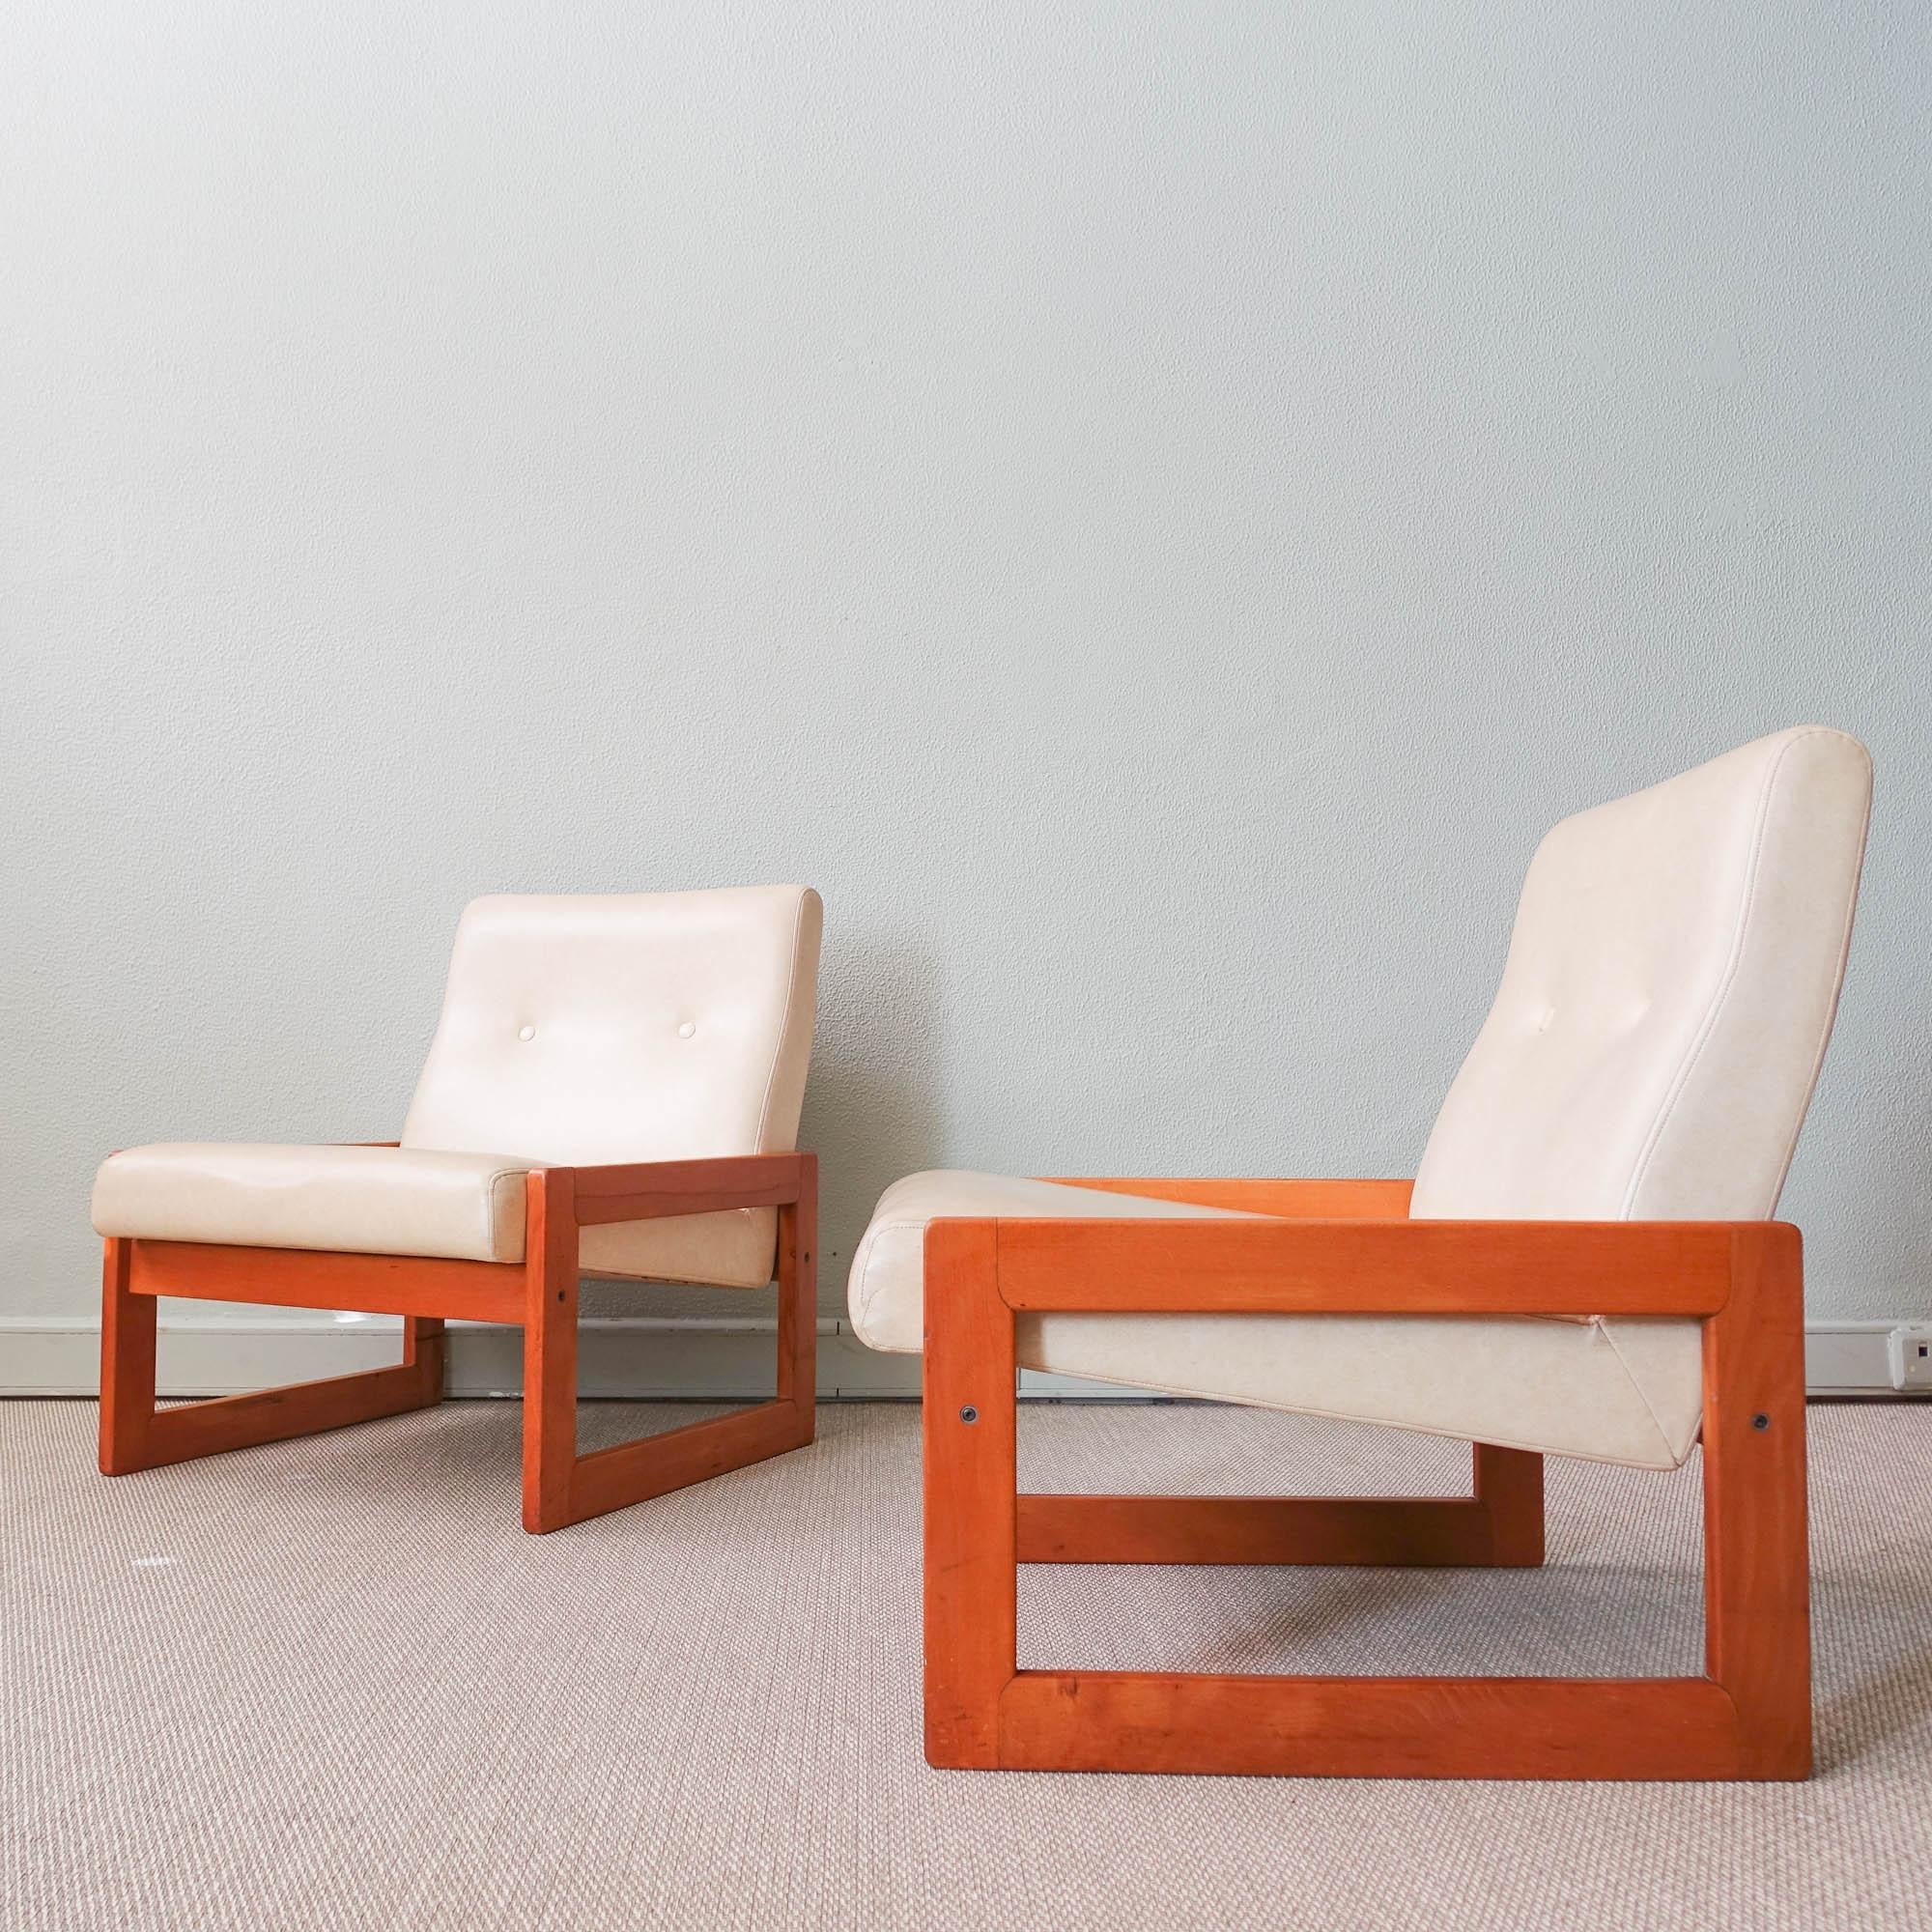 Pair of Easy Chairs, Model Espinho, by José Espinho for Olaio, 1973 For Sale 9